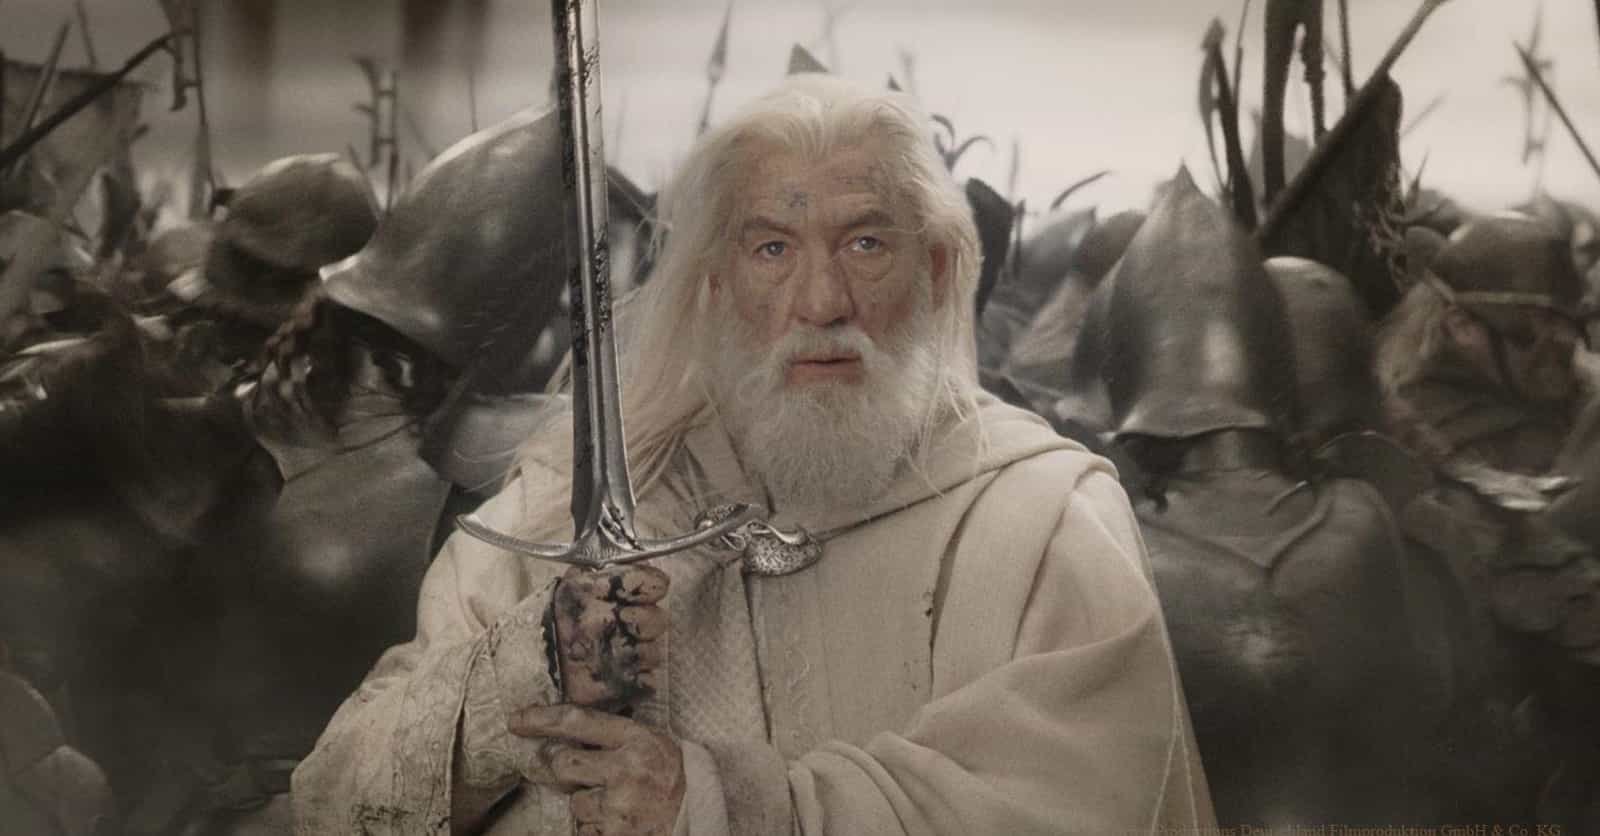 The Most Powerful Characters In 'Lord of the Rings' And ‘The Hobbit’